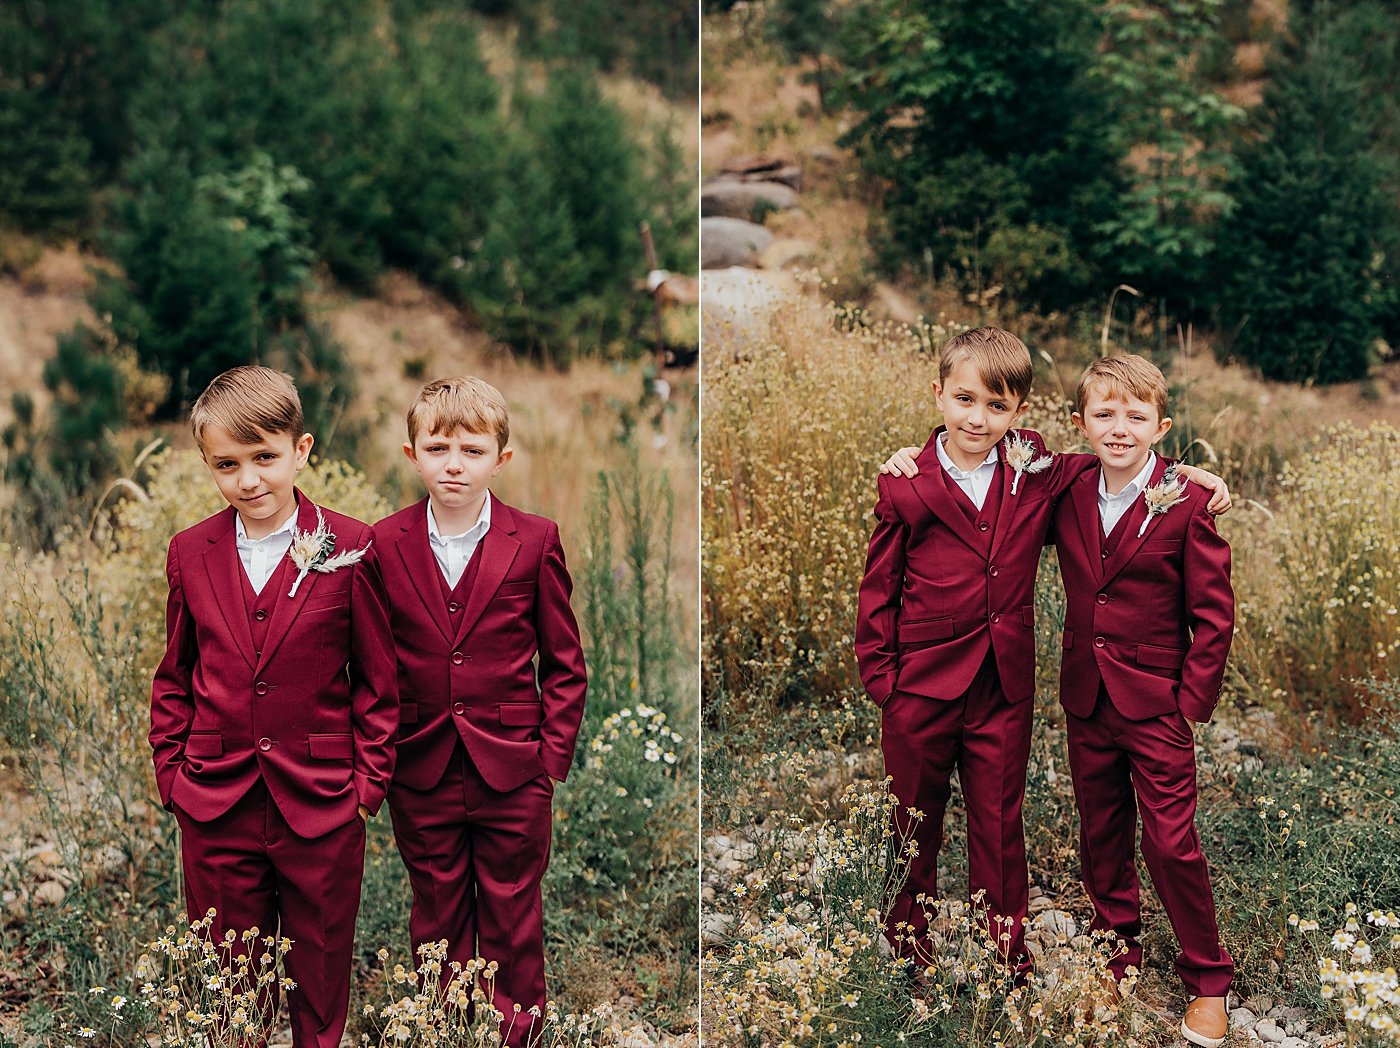 Brothers standing beside each other in maroon suits. Megan Montalvo Photography.